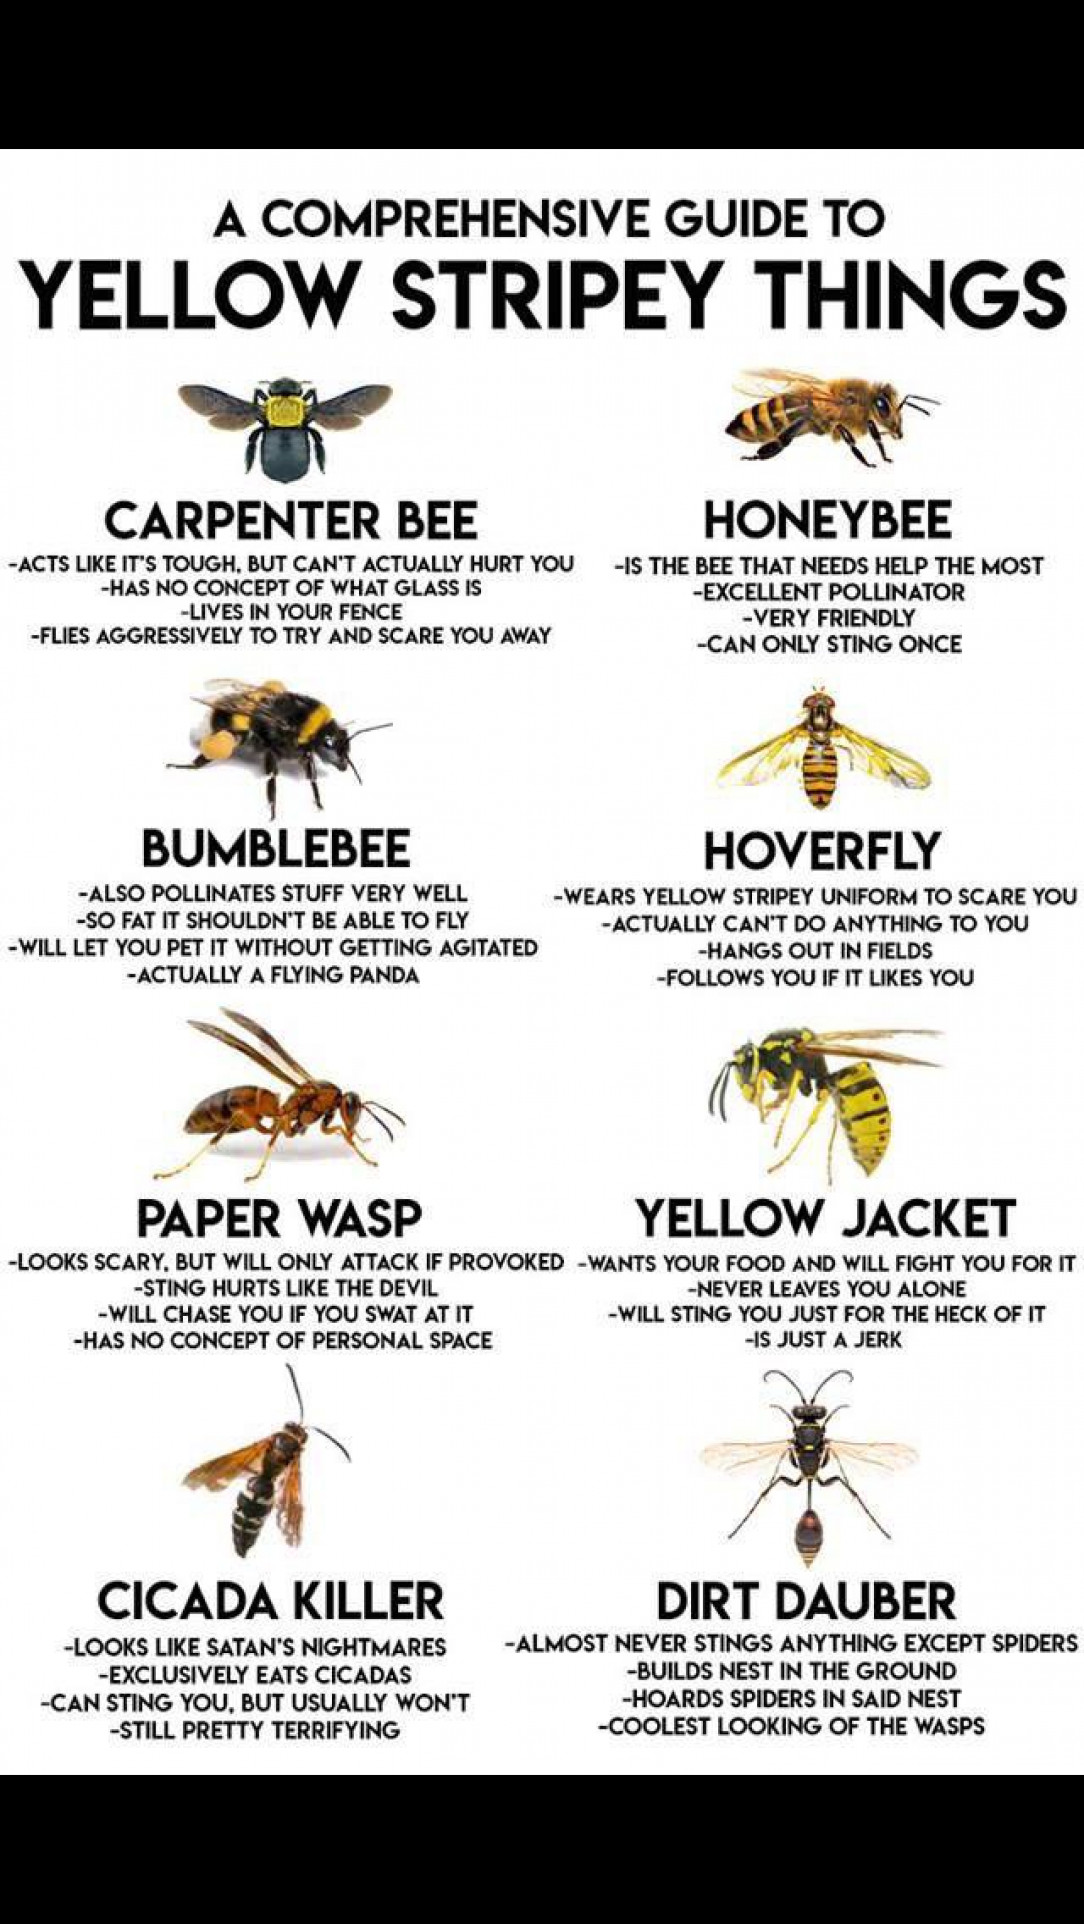 A comprehensive guide to yellow stripey things